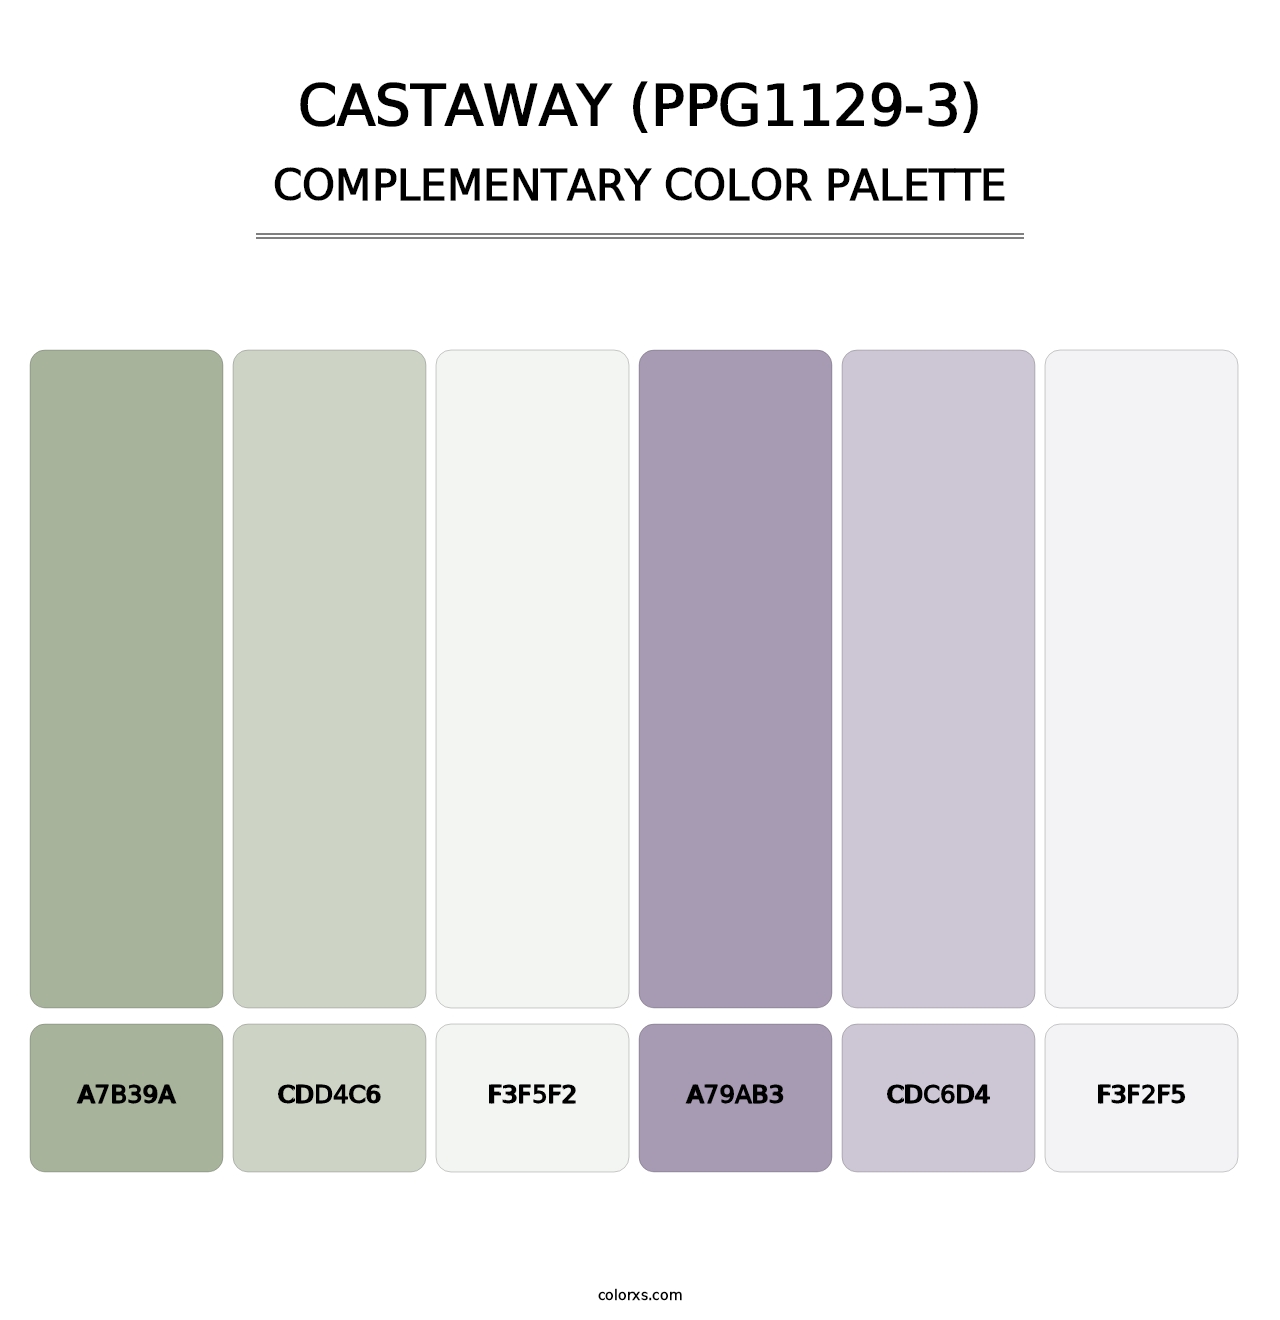 Castaway (PPG1129-3) - Complementary Color Palette